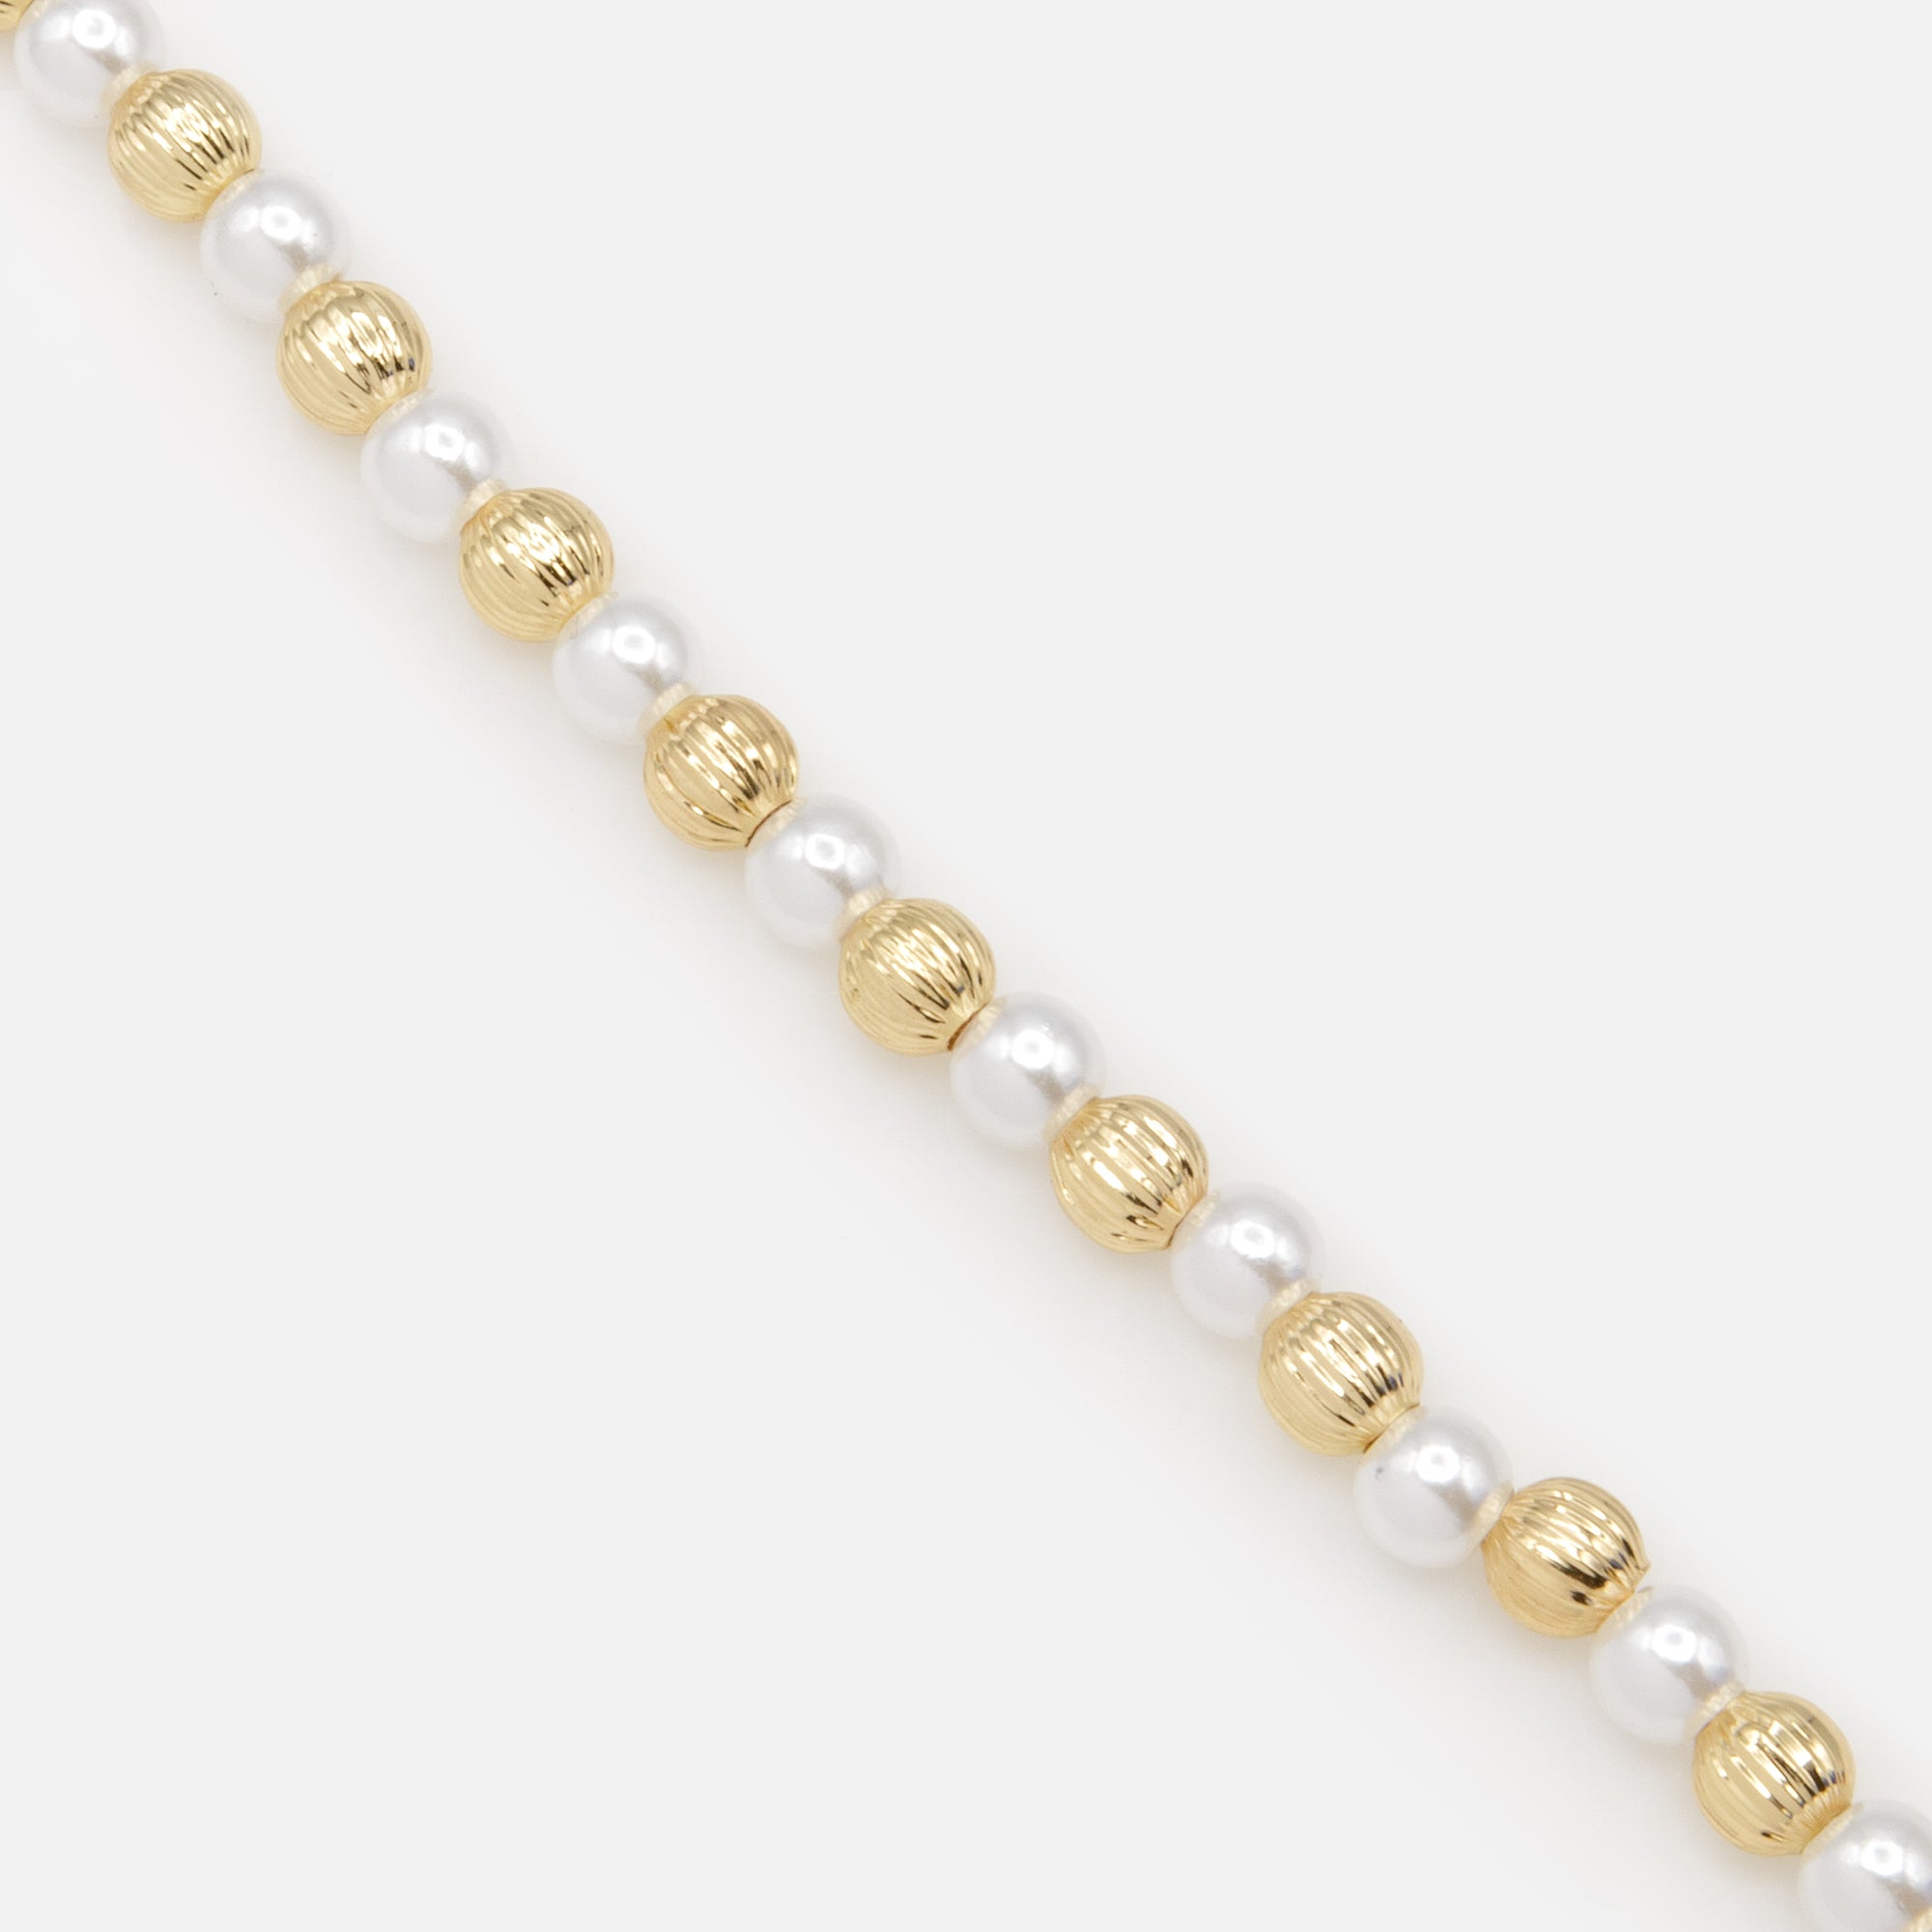 Pearl and ball bracelet with golden grooves